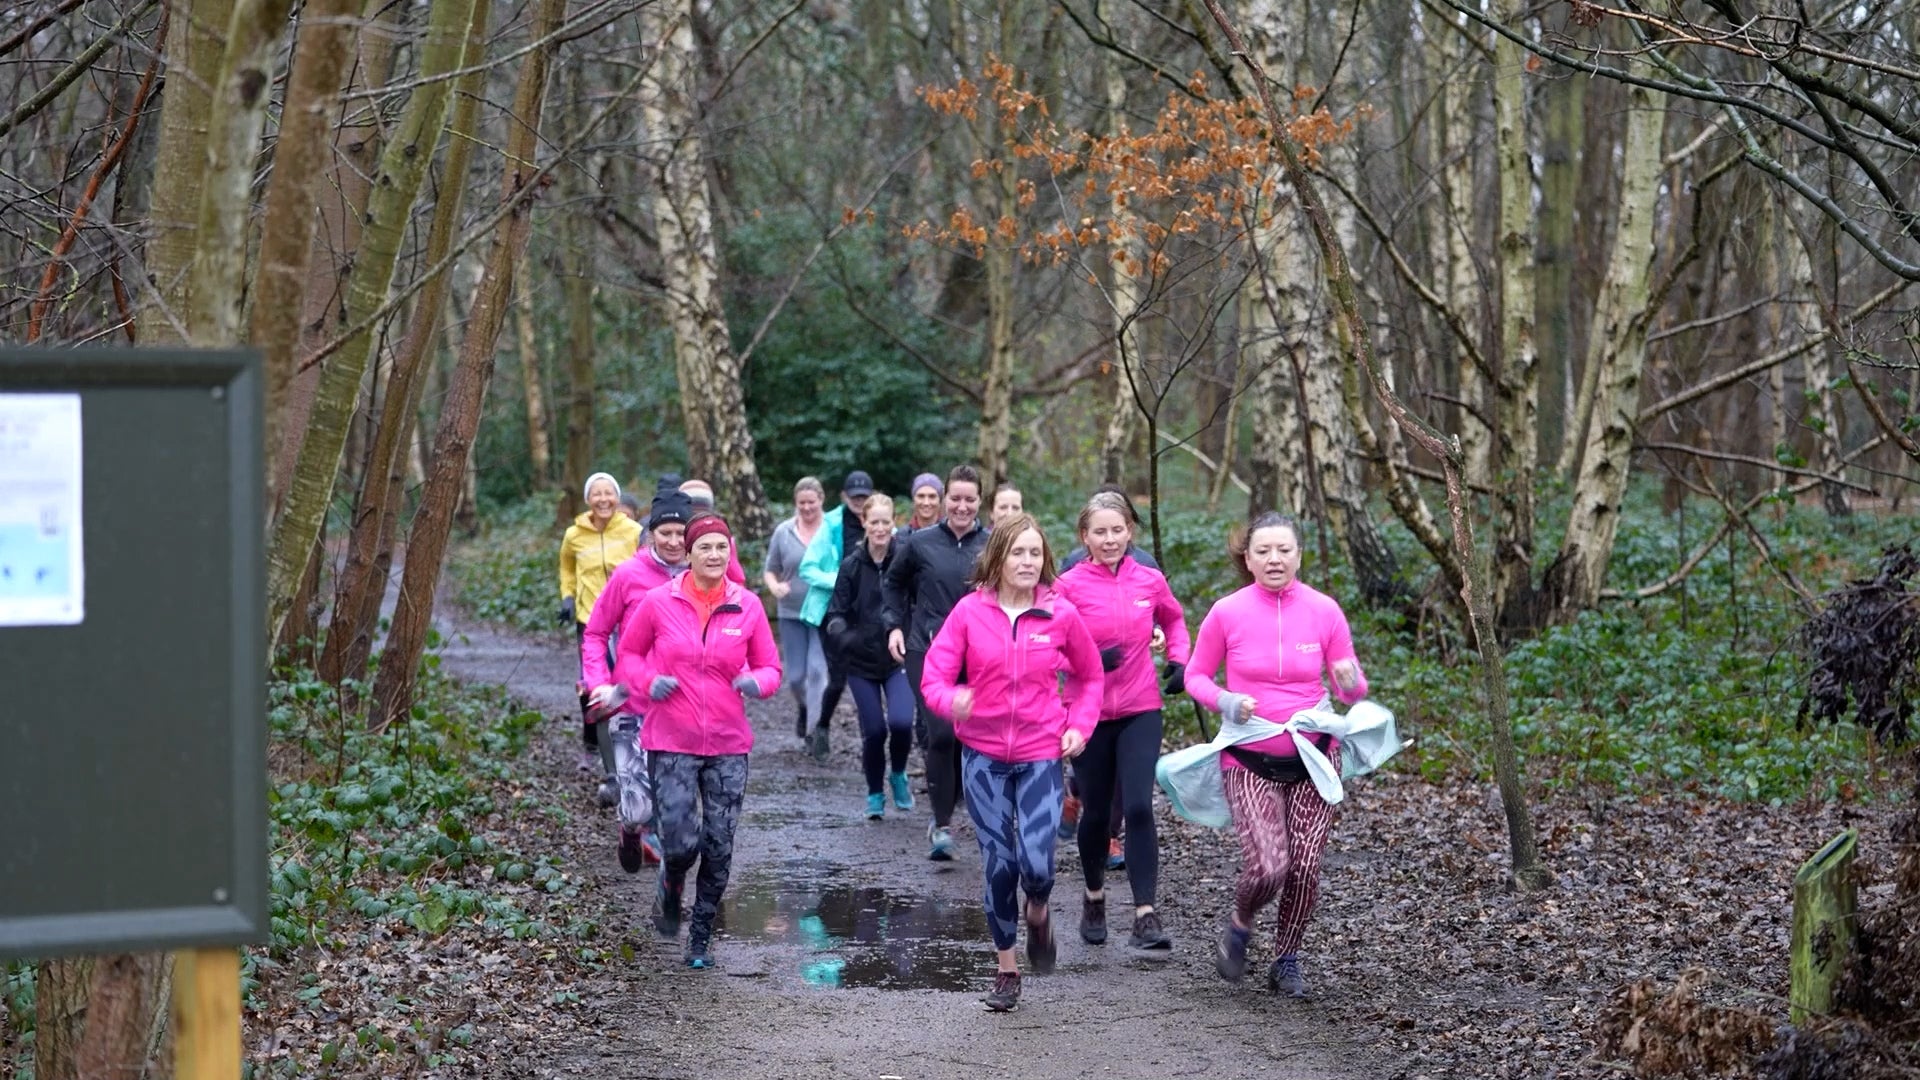 Female Met officers join all-women running club to discuss women's safety |  The Independent